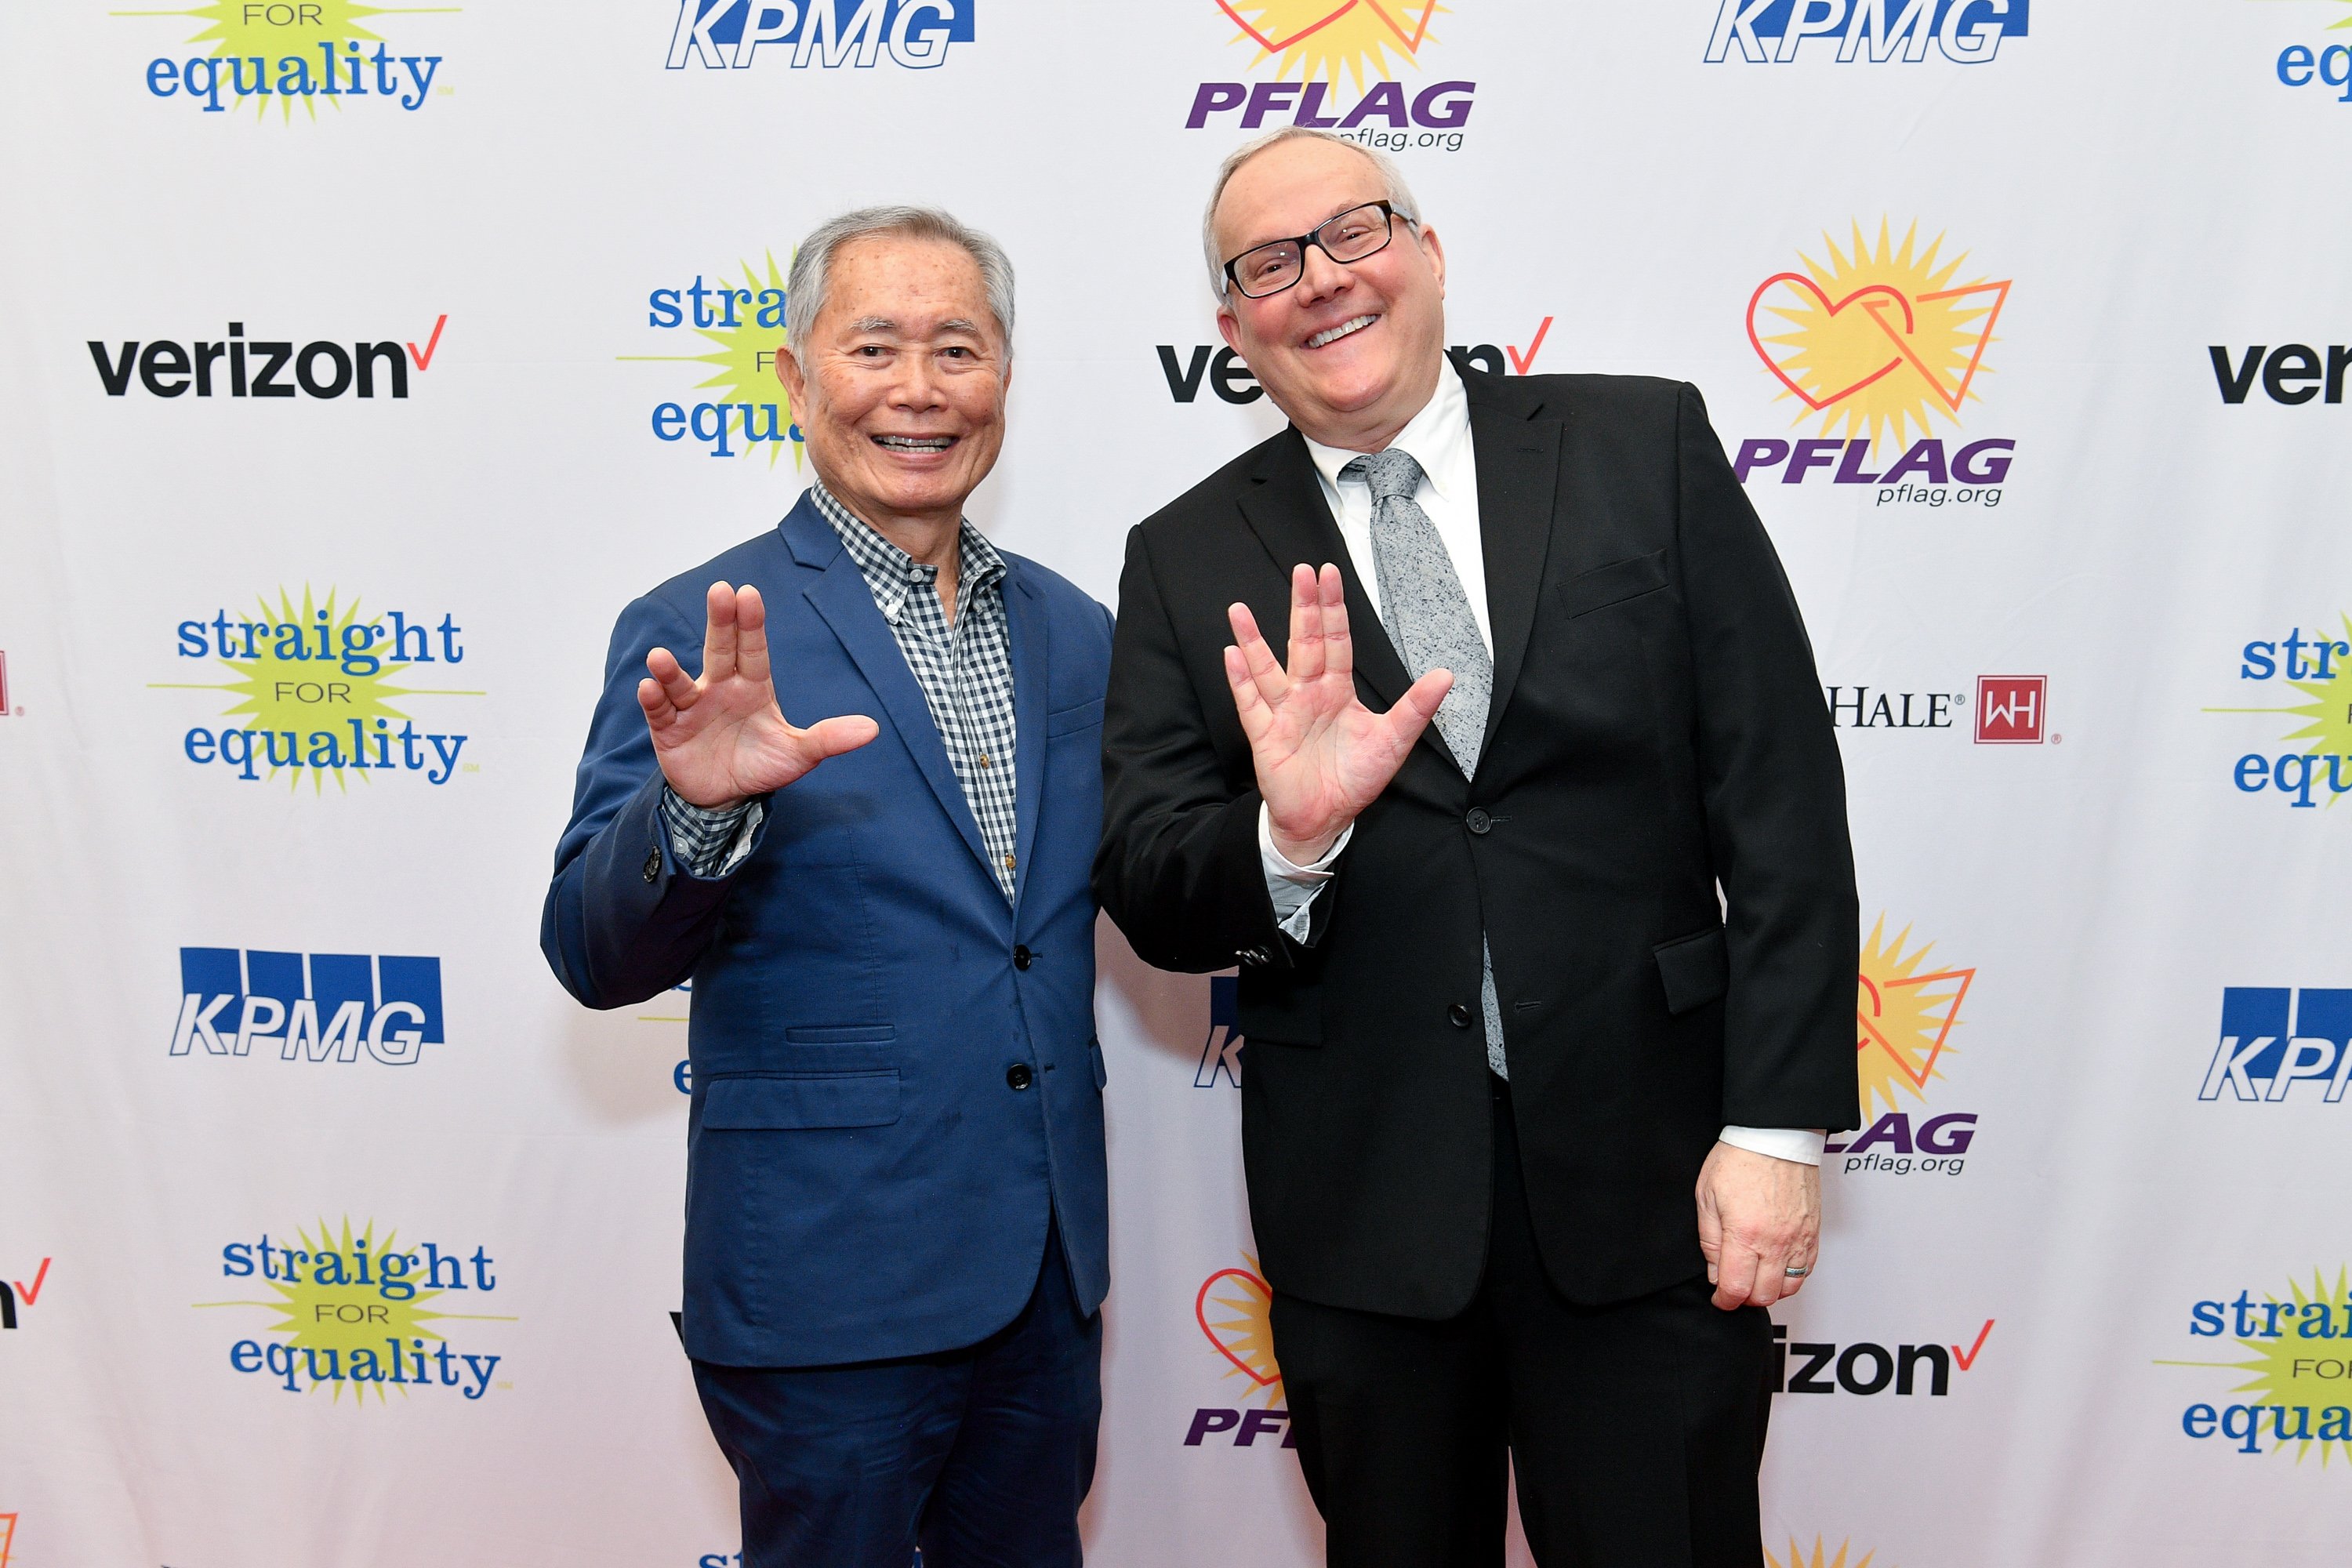 George Takei and Brad Altman at the "PFLAG Gives Thanks: Celebrating Inclusion in the Workplace" event in New York on November 18, 2019 | Source: Getty Images